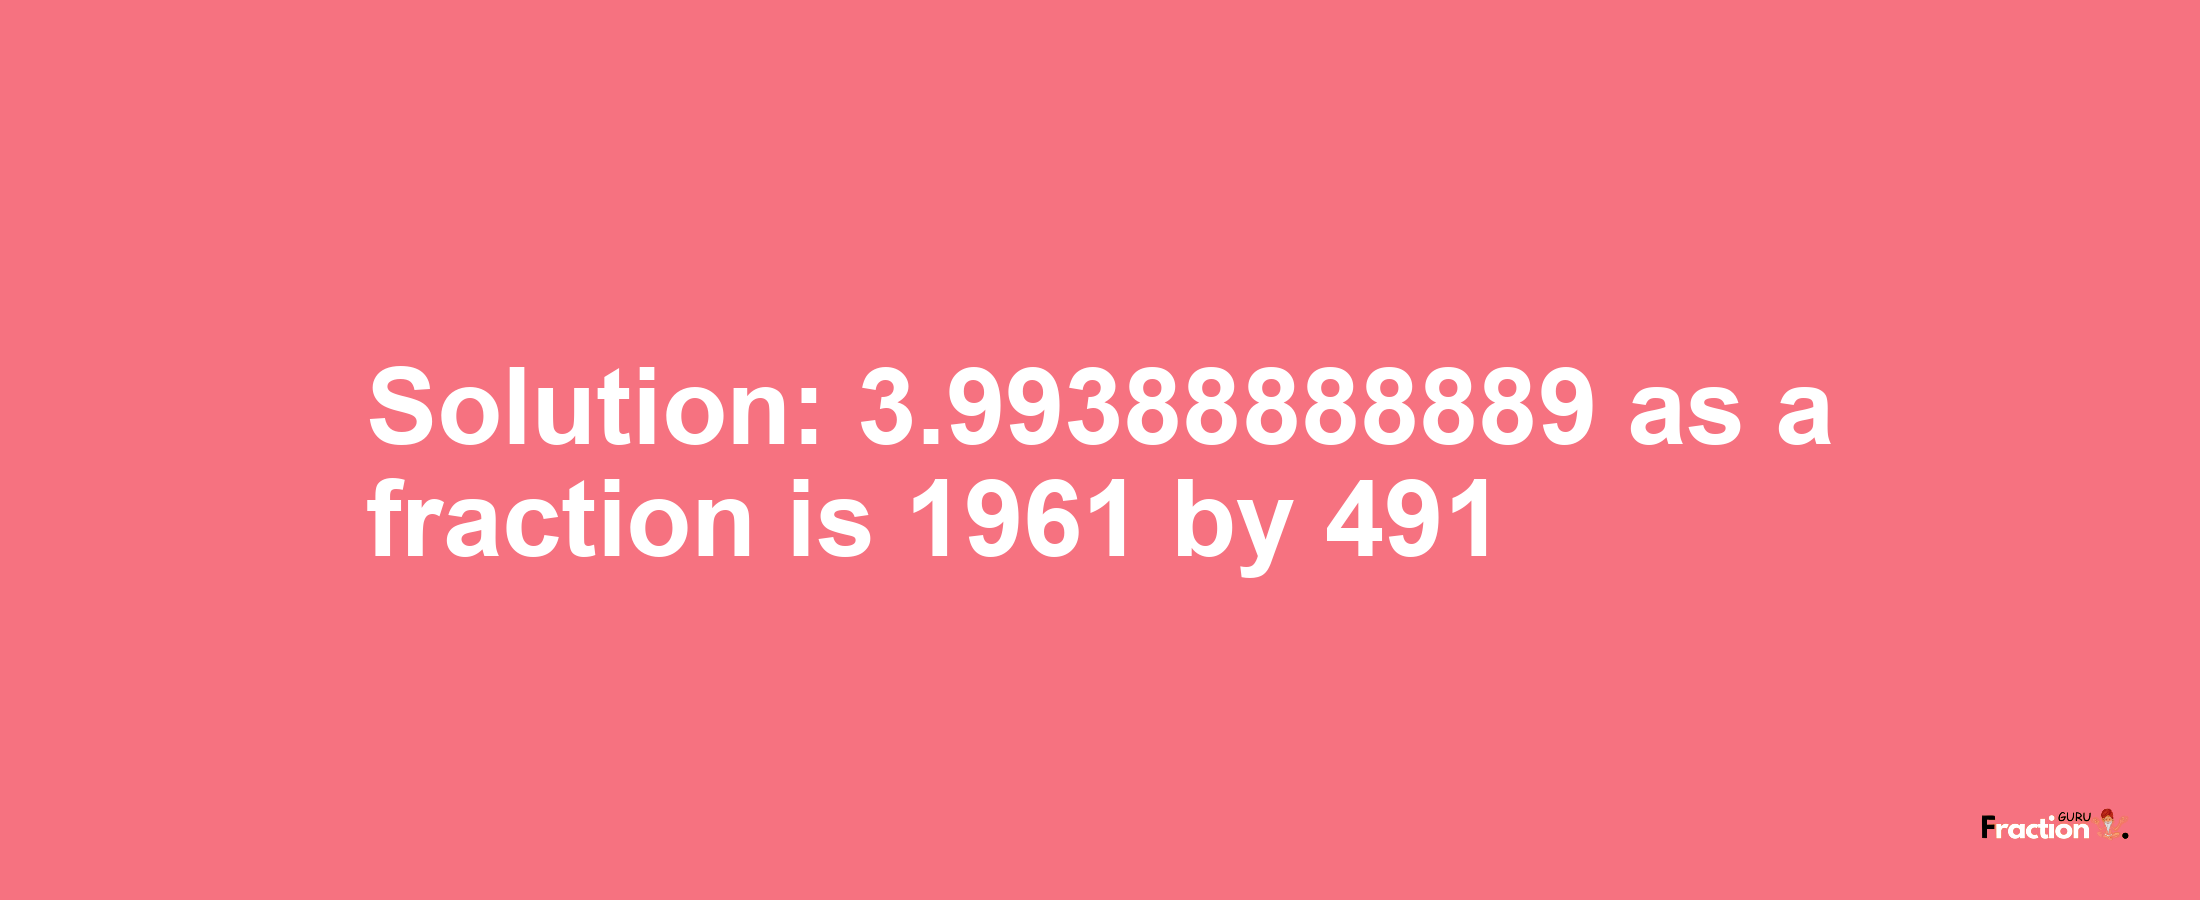 Solution:3.99388888889 as a fraction is 1961/491